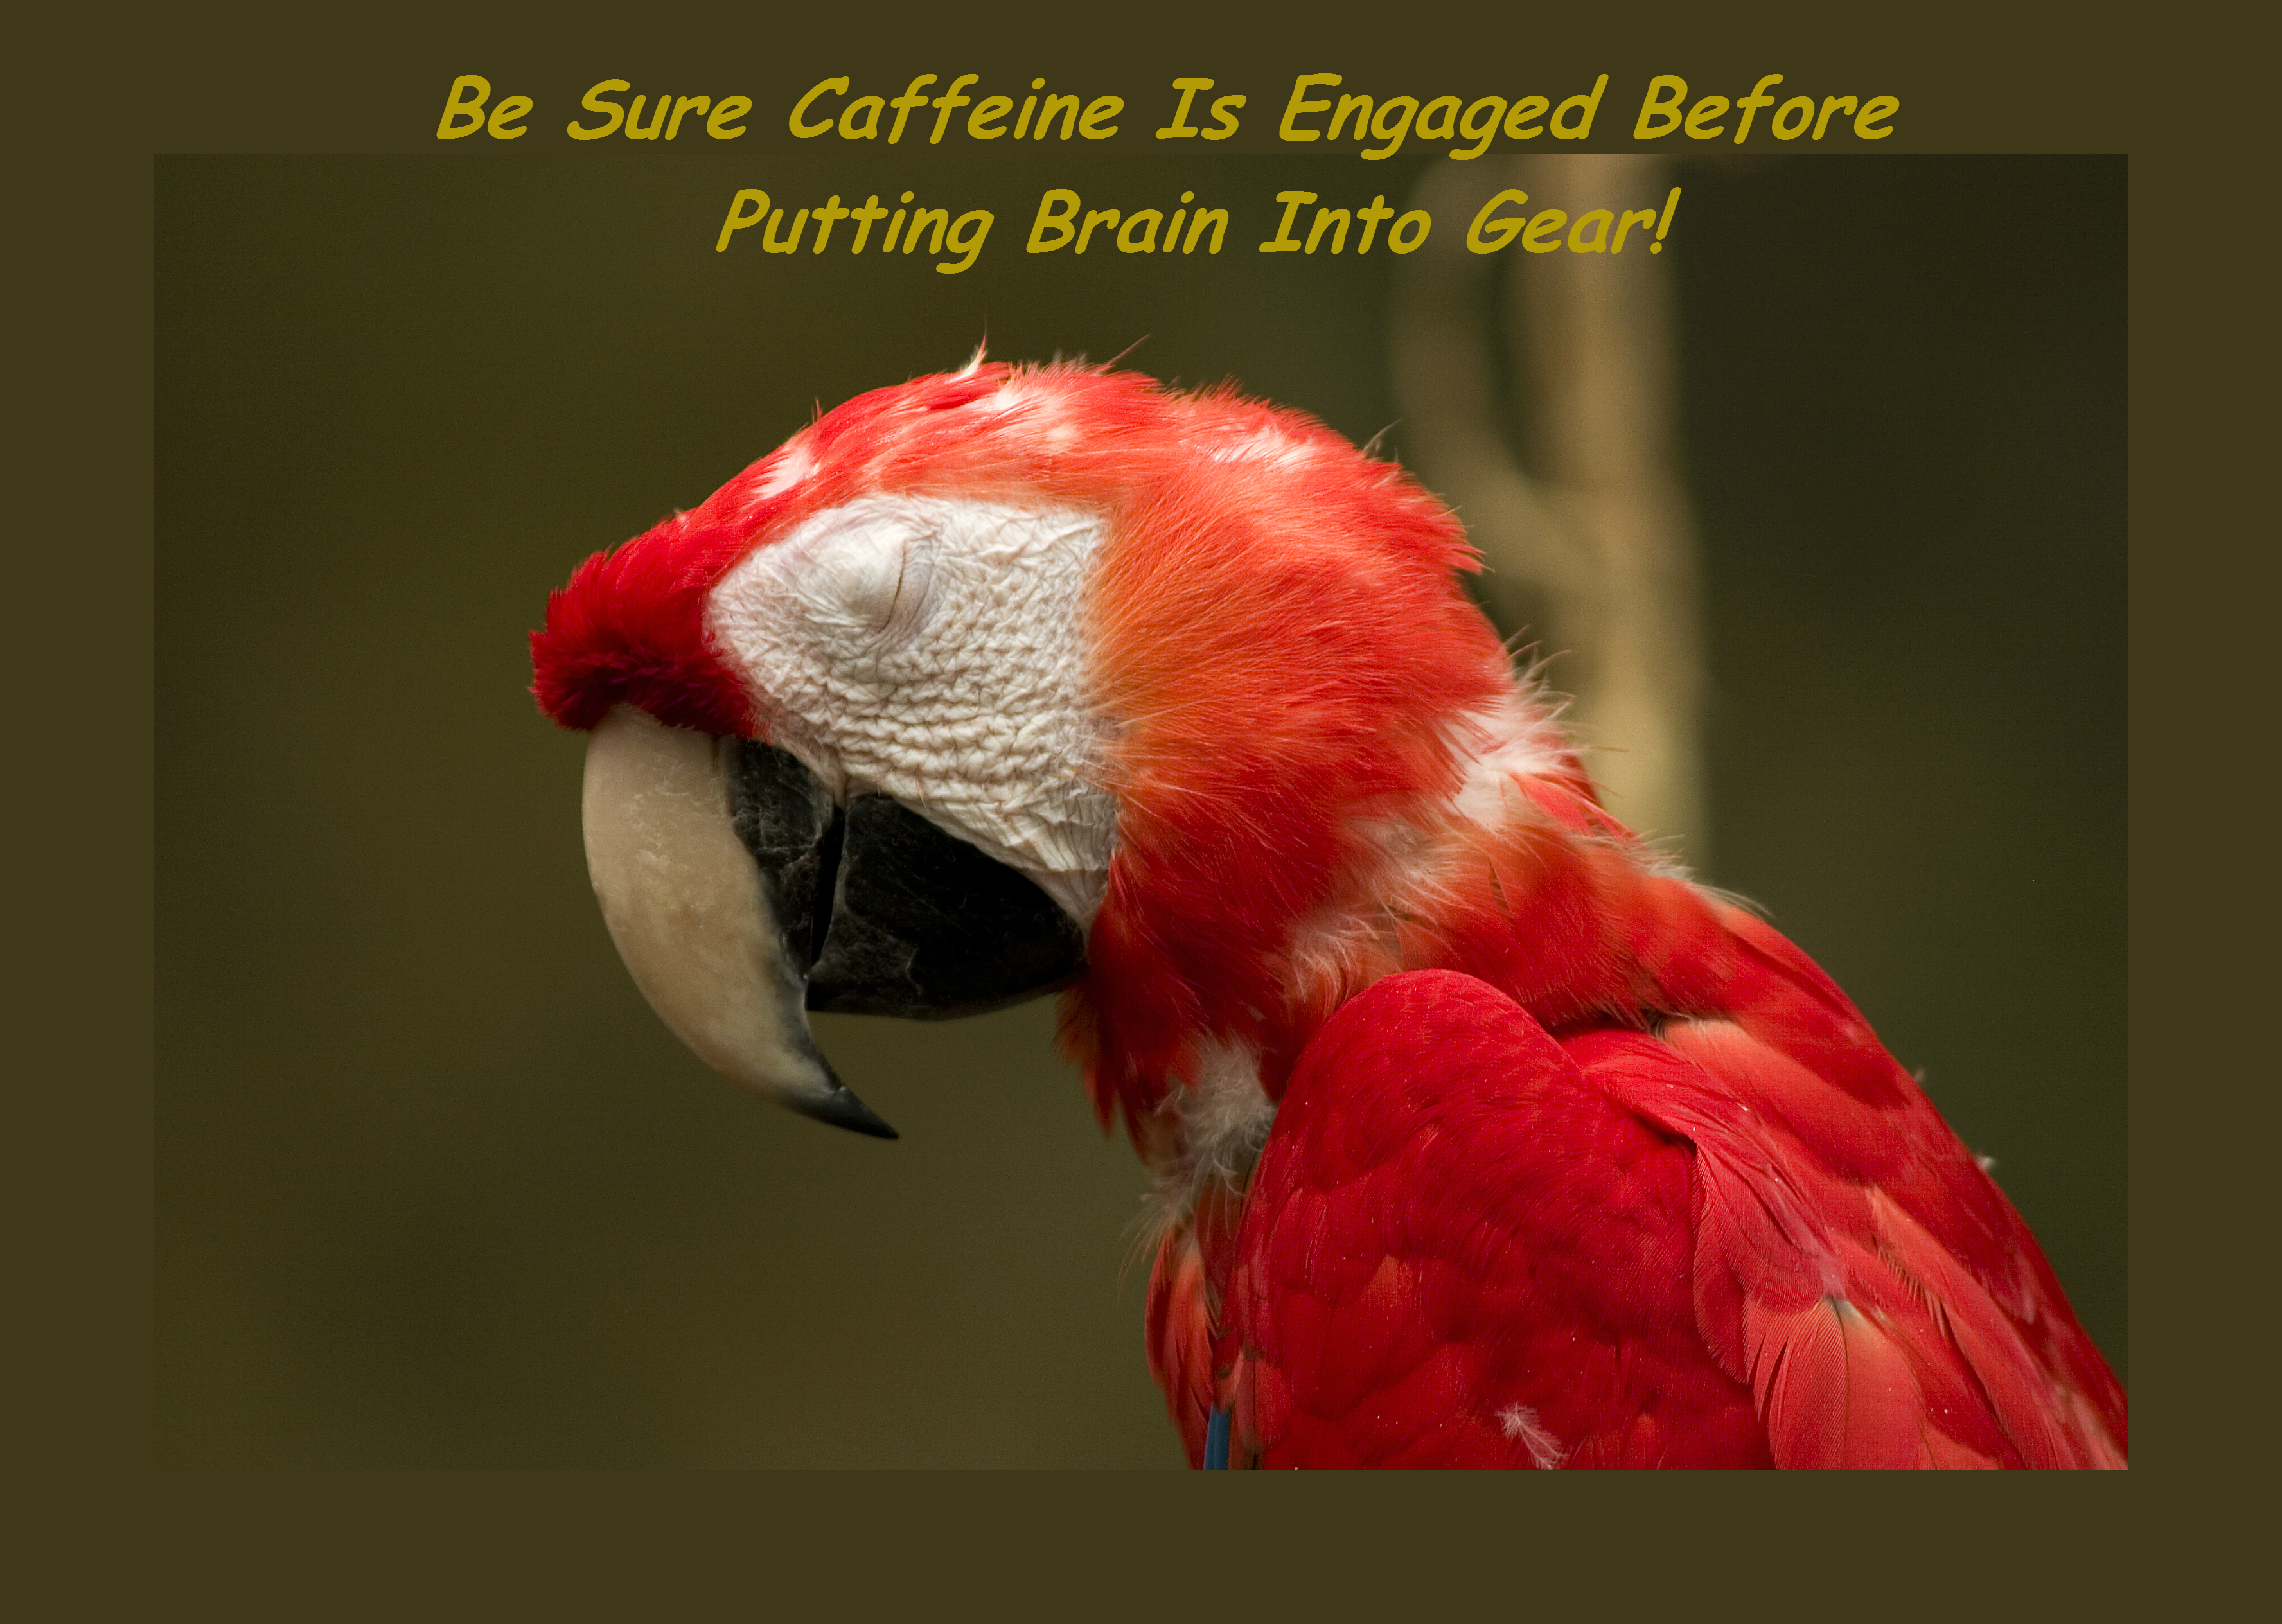 Be Sure Caffeine Is Engaged Before Putting Brain Into Gear